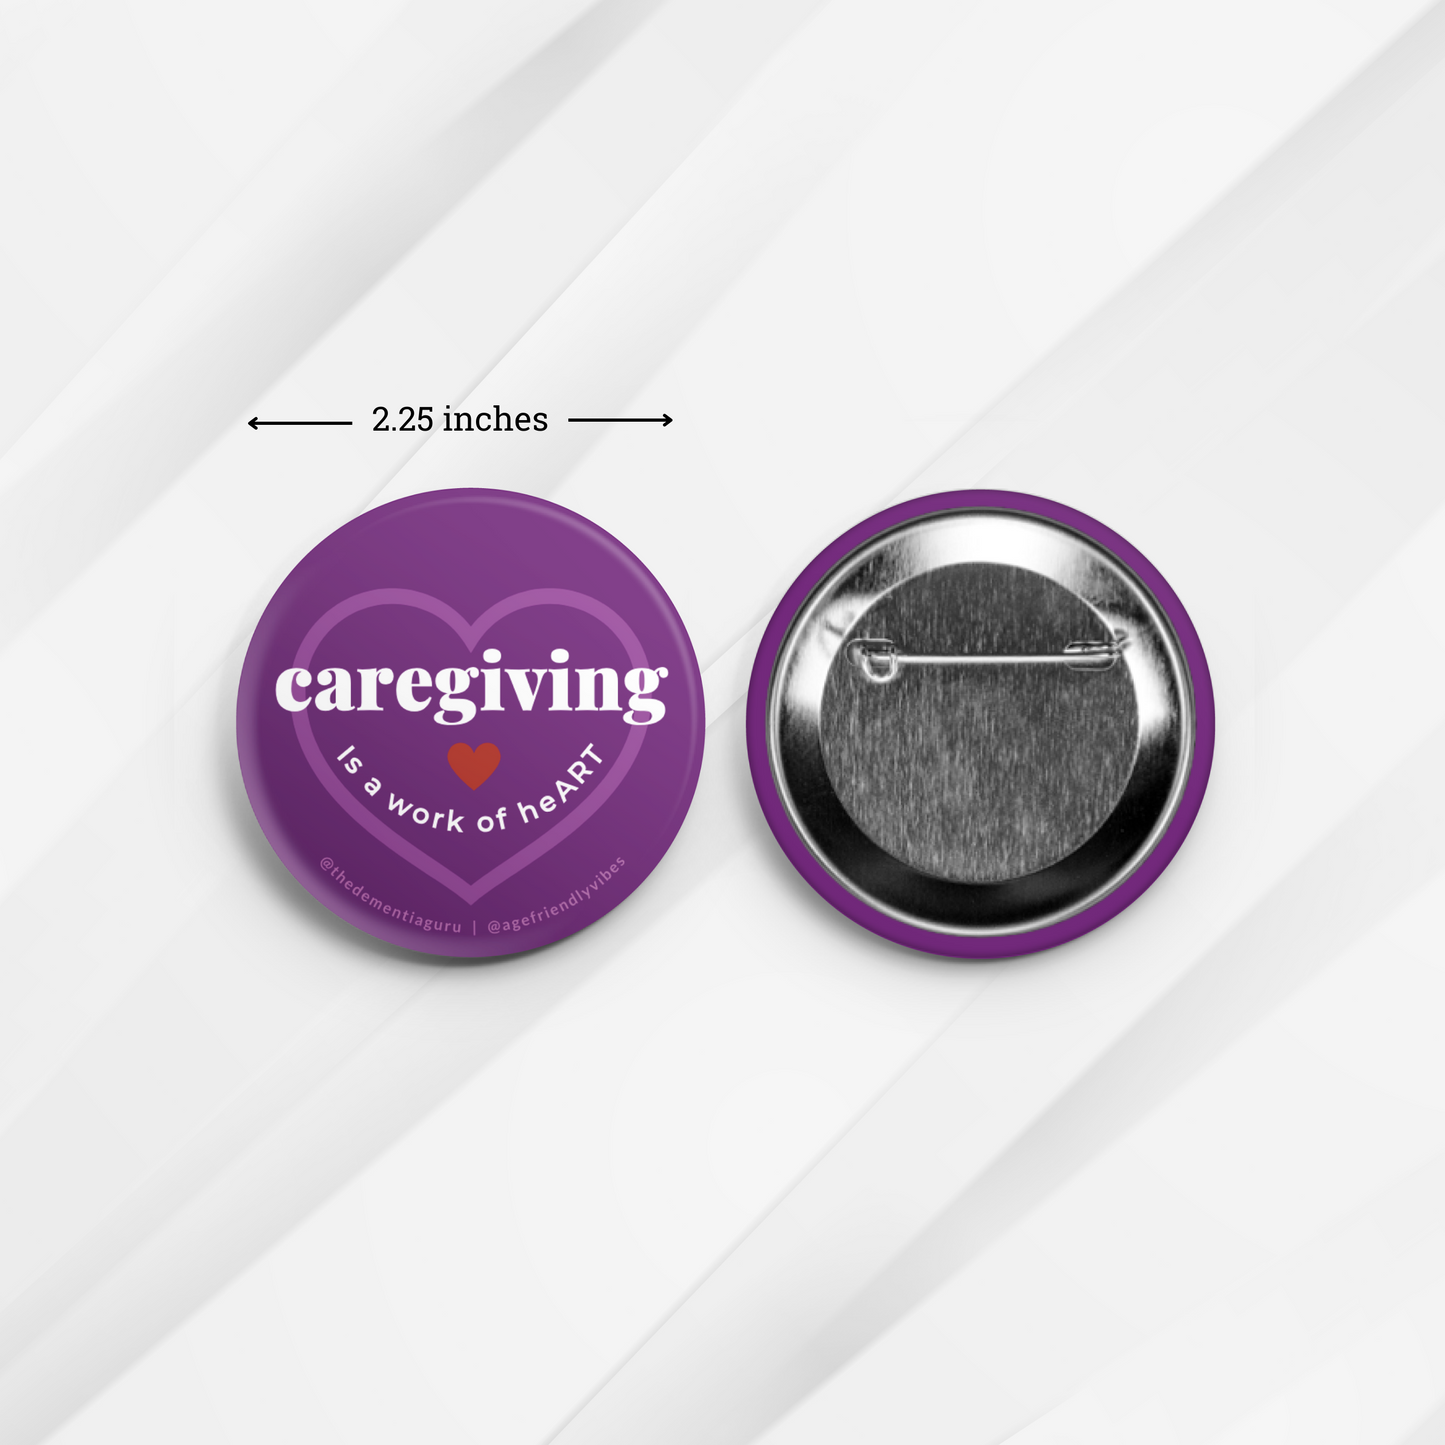 Caregiving is a work of heART, Caregiver Appreciation Pin-Back Button